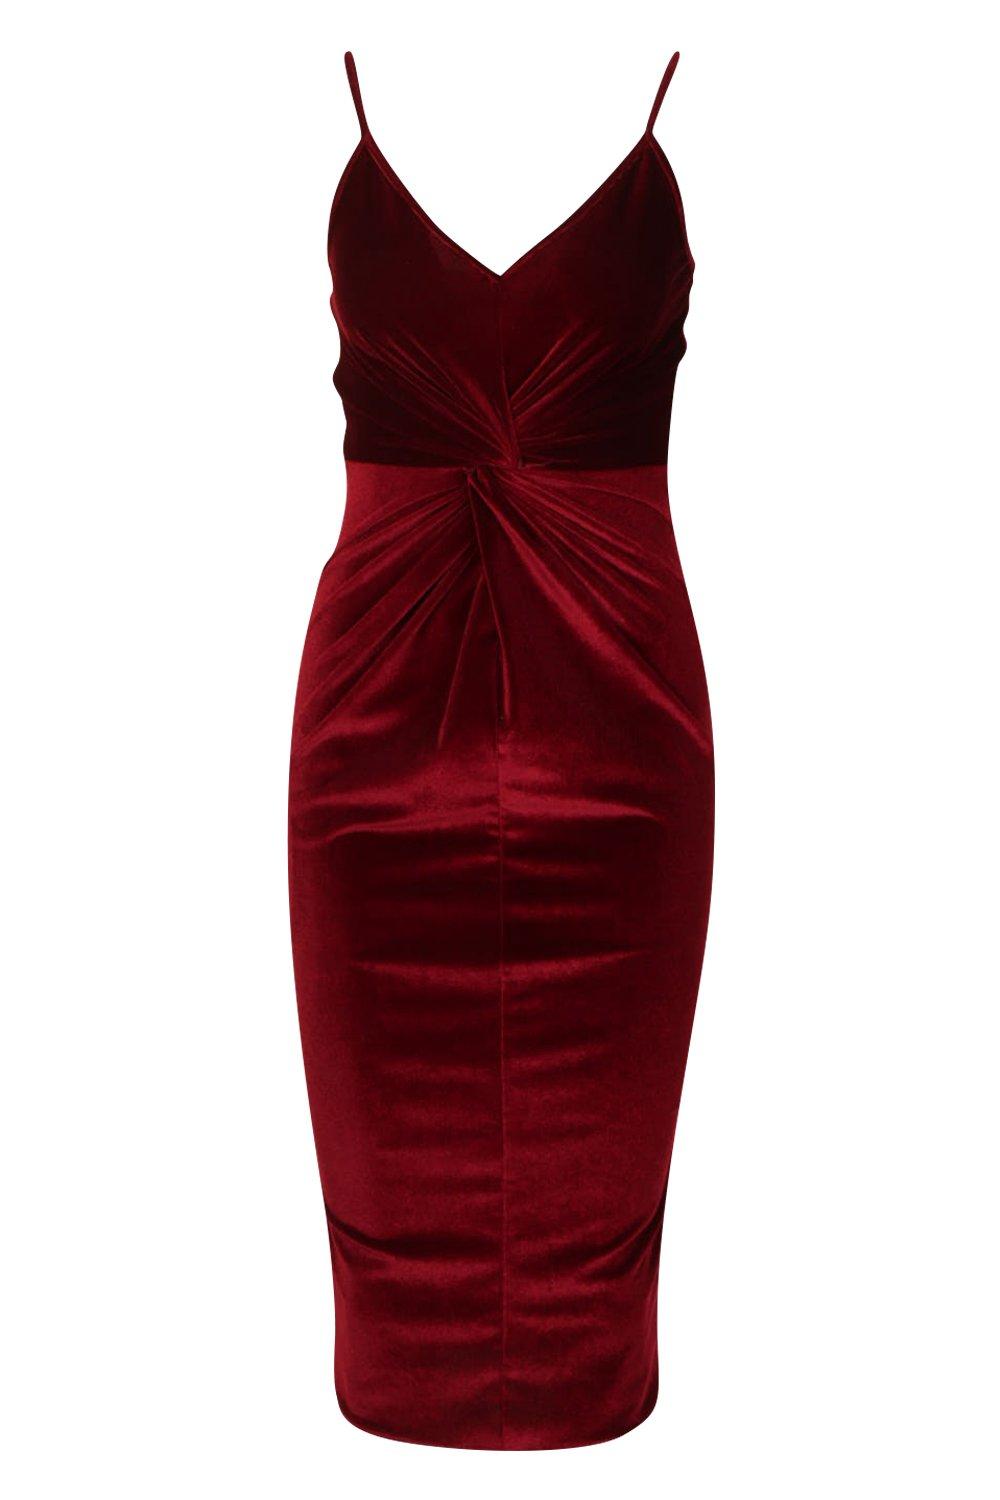  VAIZA Dresses for Women Women's Dress Twist Front Ruched  Bodycon Dress Dresses (Color : Burgundy, Size : Medium) : Clothing, Shoes &  Jewelry